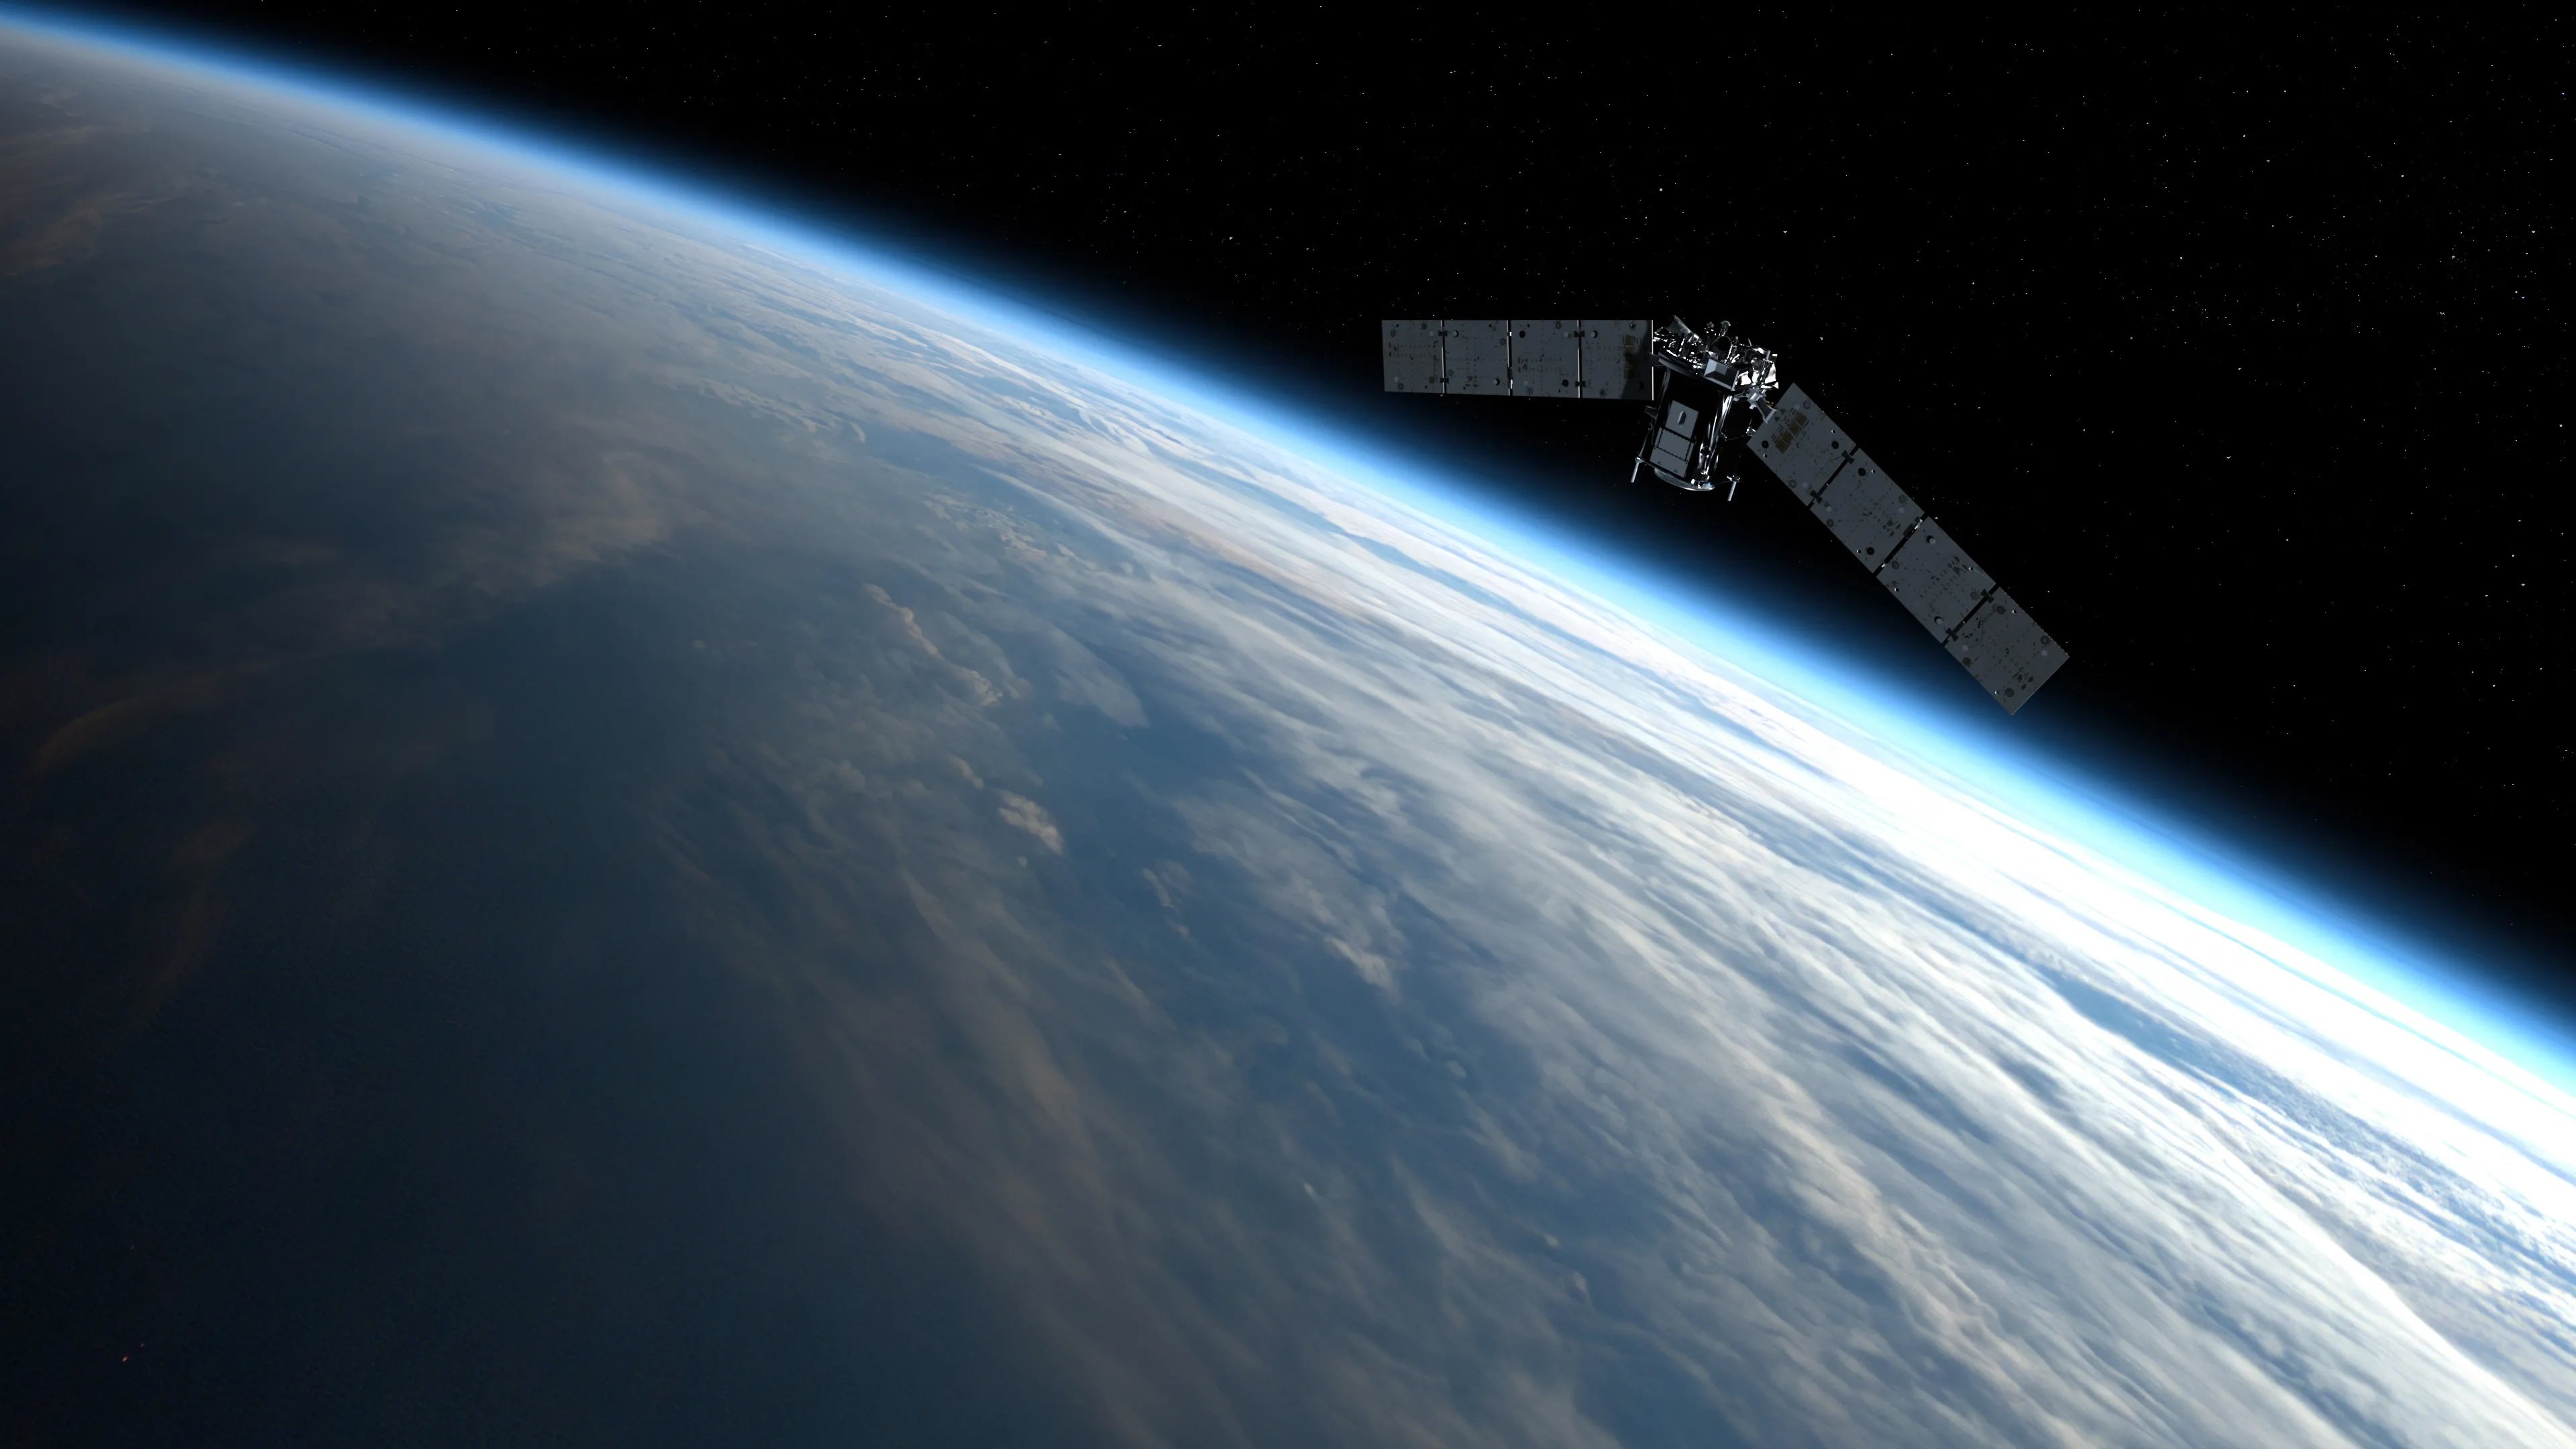 Artist’s impression of the TIMED spacecraft in orbit, scanning Earth